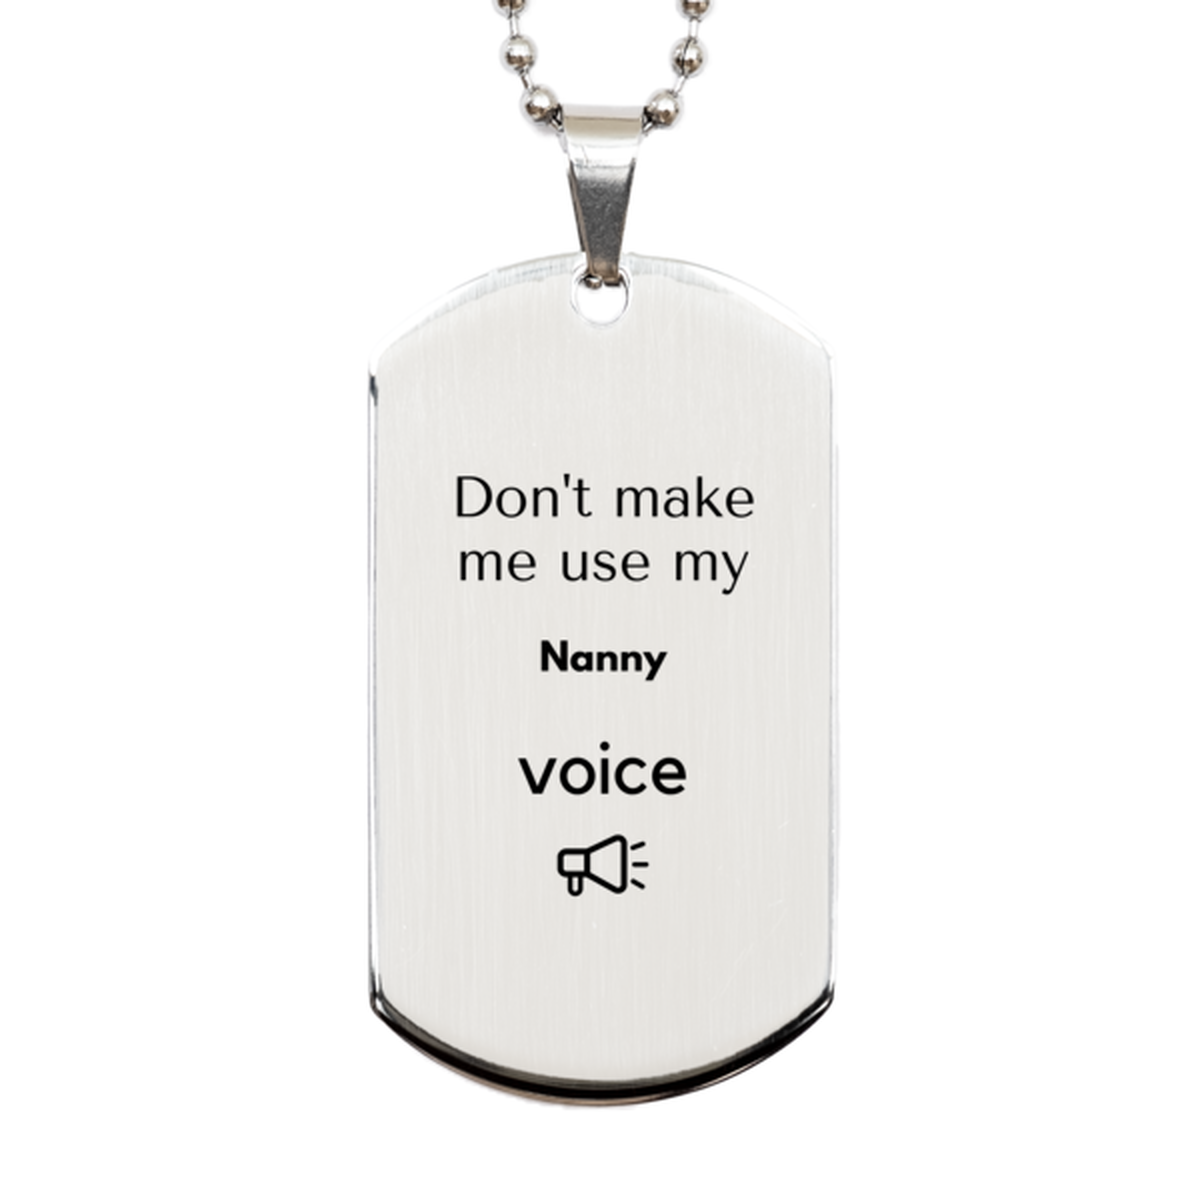 Don't make me use my Nanny voice, Sarcasm Nanny Gifts, Christmas Nanny Silver Dog Tag Birthday Unique Gifts For Nanny Coworkers, Men, Women, Colleague, Friends